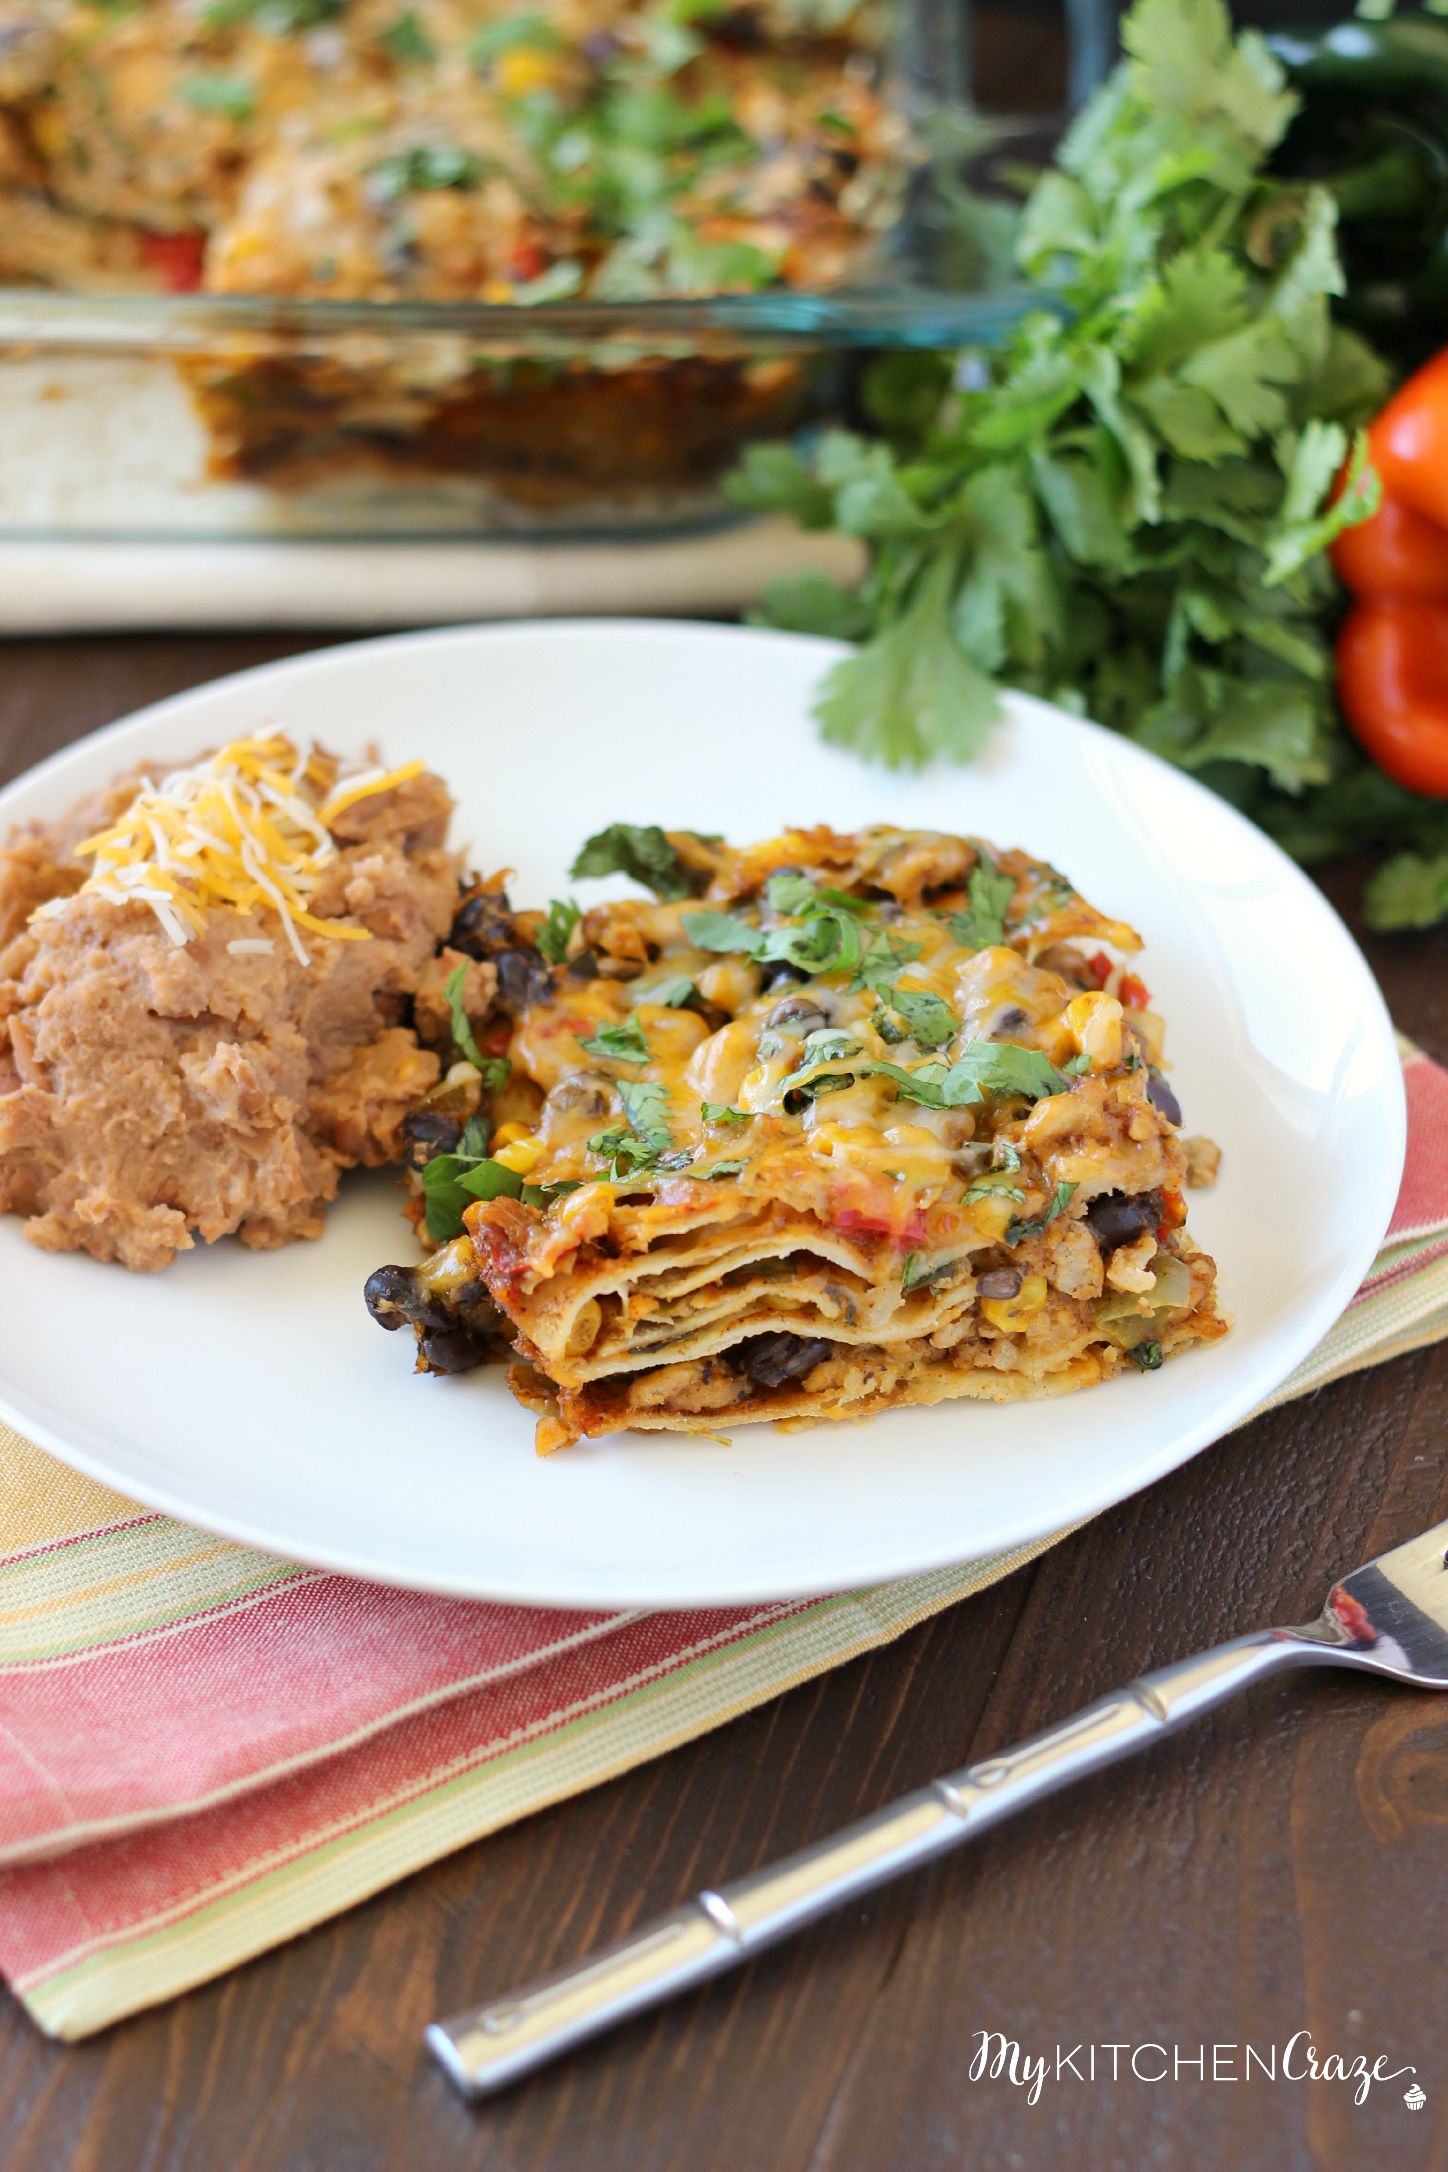 Tex-Mex Enchilada Casserole ~ mykitchencraze.com ~ This casserole is filled with corn, black beans, peppers and a delicious homemade enchilada sauce! Delicious!!